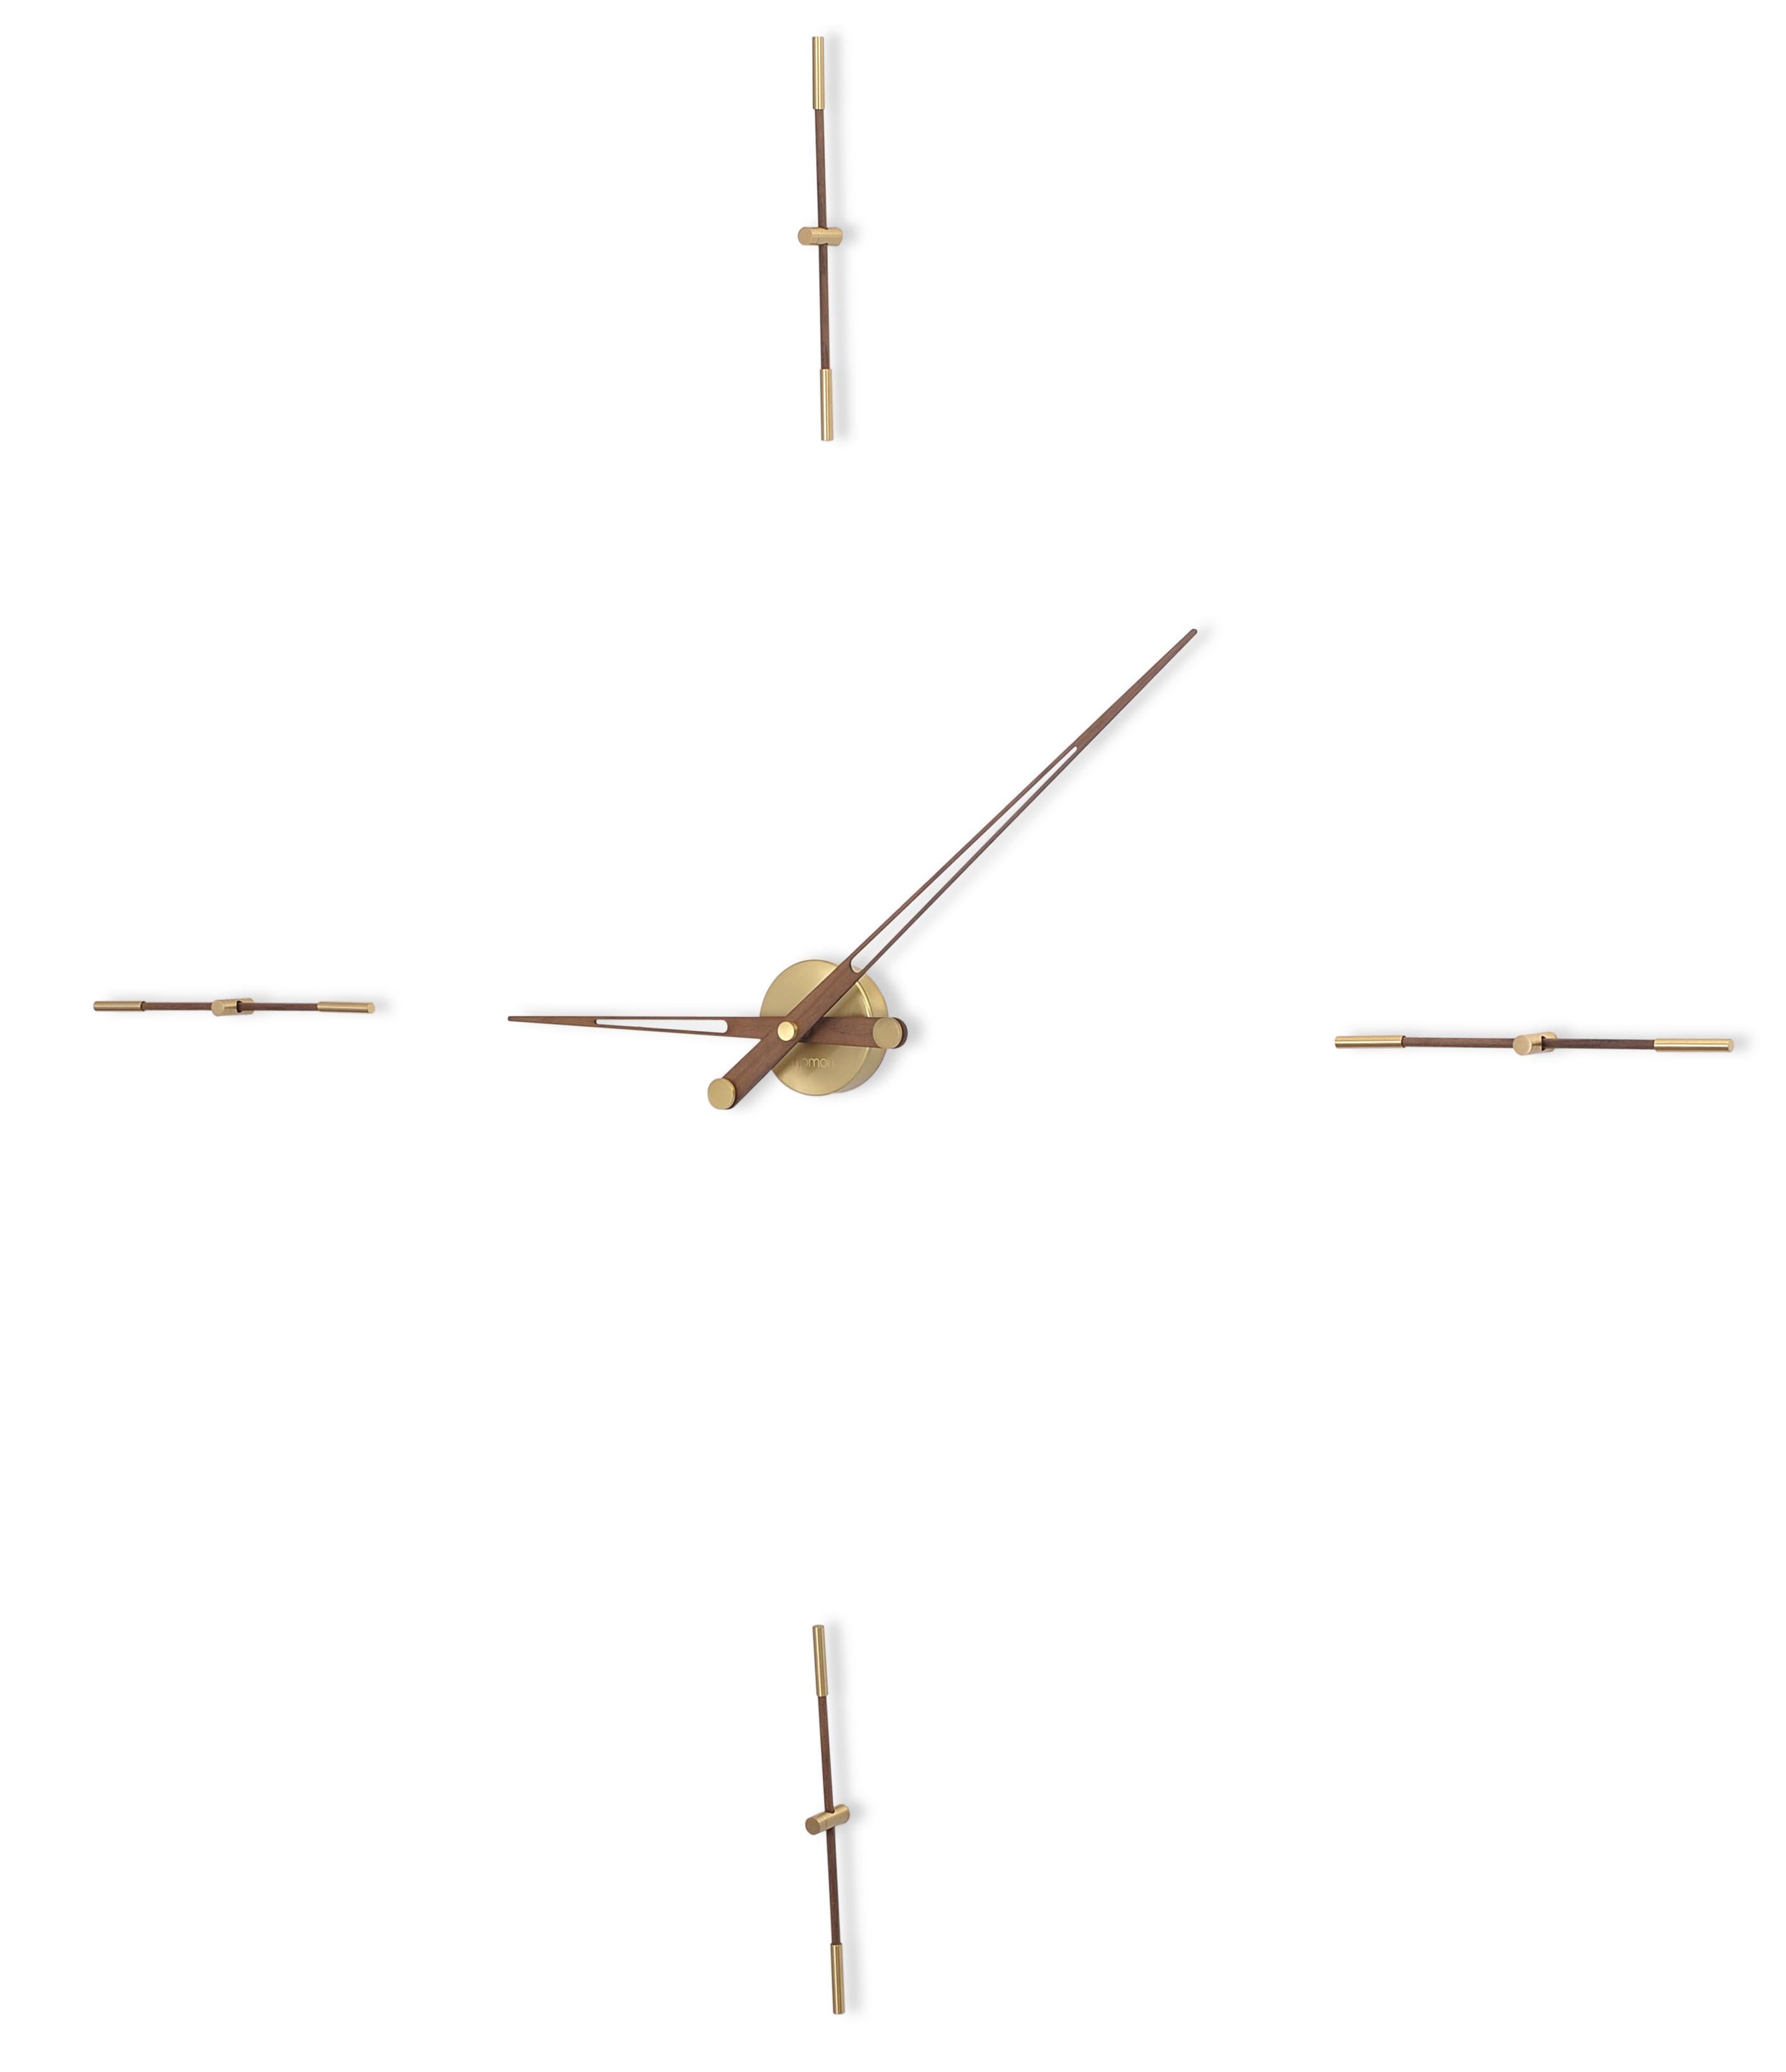 Impossible not to stop to admire it. Impossible not to observe every detail of its configuration.

It is the Nomon Merlin 4 T Clock available in our online store with all the features that make it a very special wall clock. It is minimalism in its